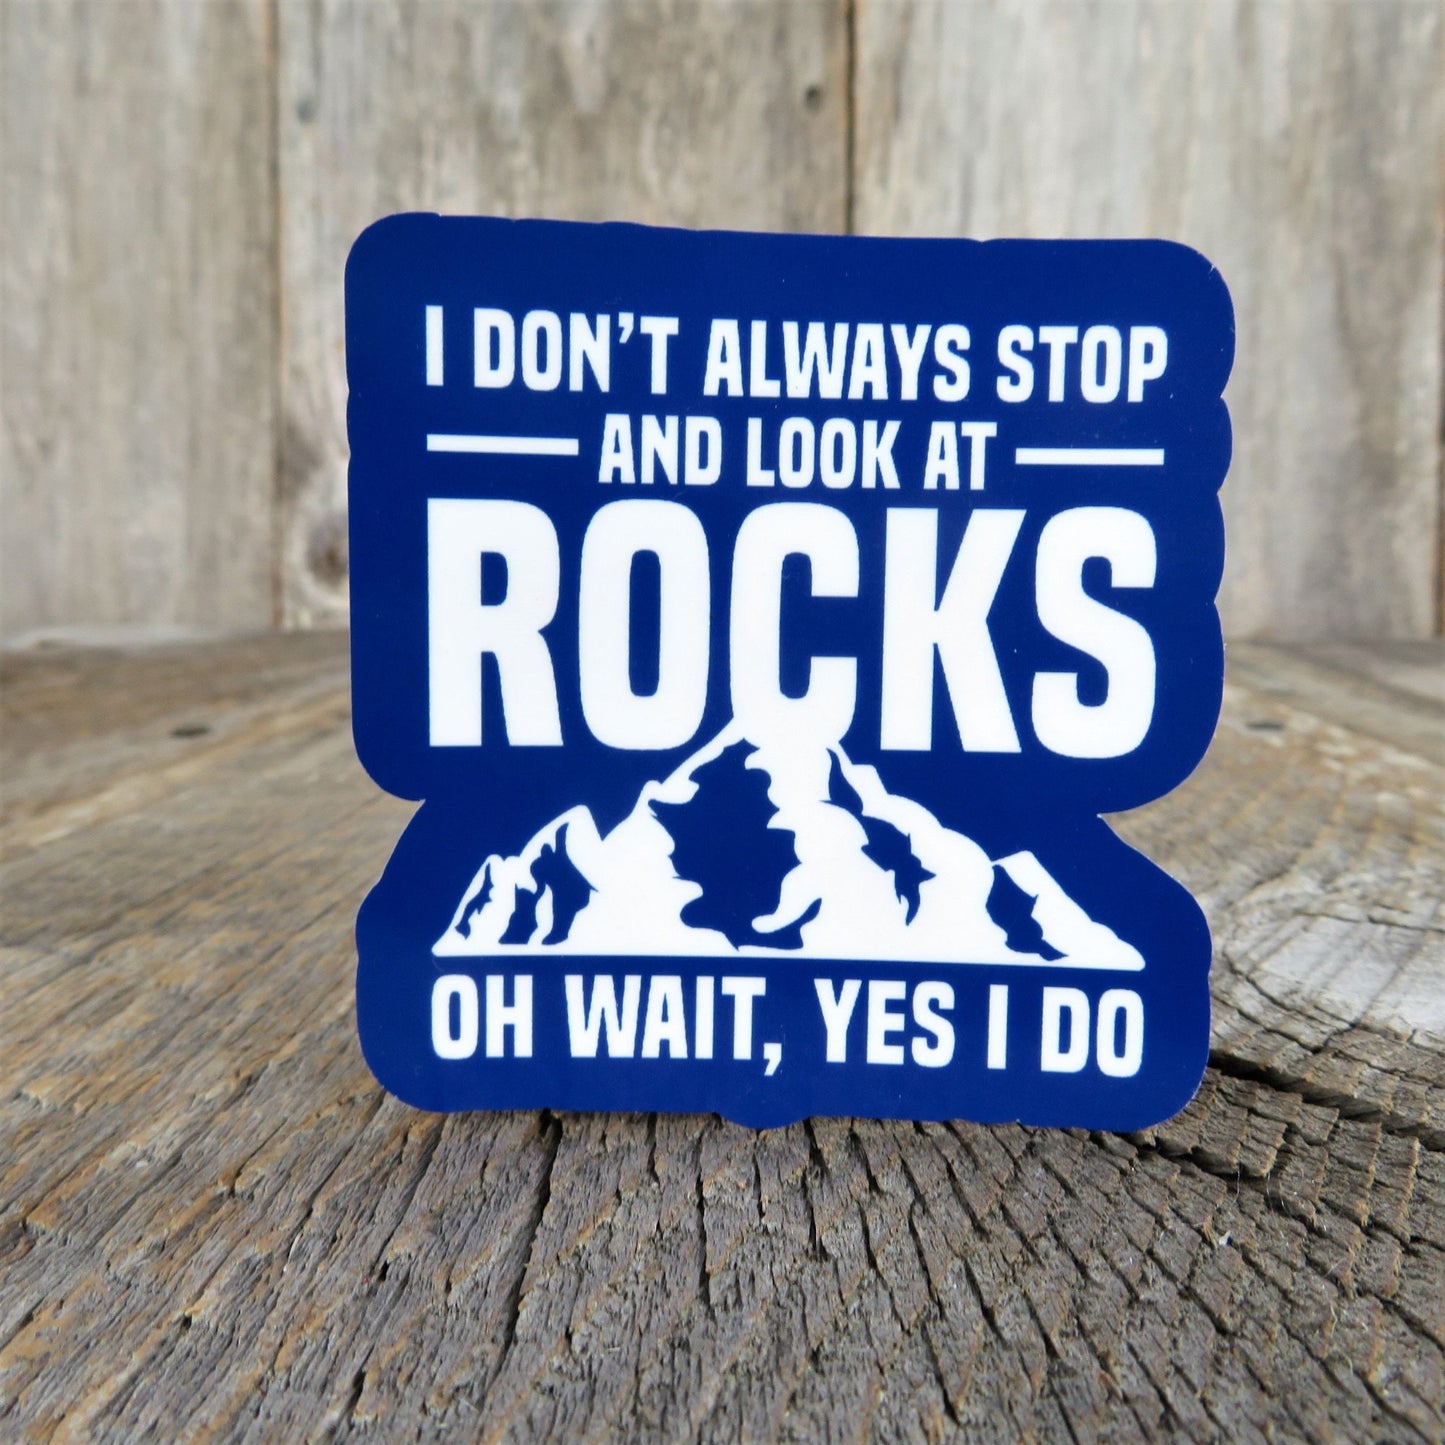 I Don't Always Stop and Look at Rocks Sticker Waterproof Rock Lover Blue White Waterproof Geologist Humor Funny